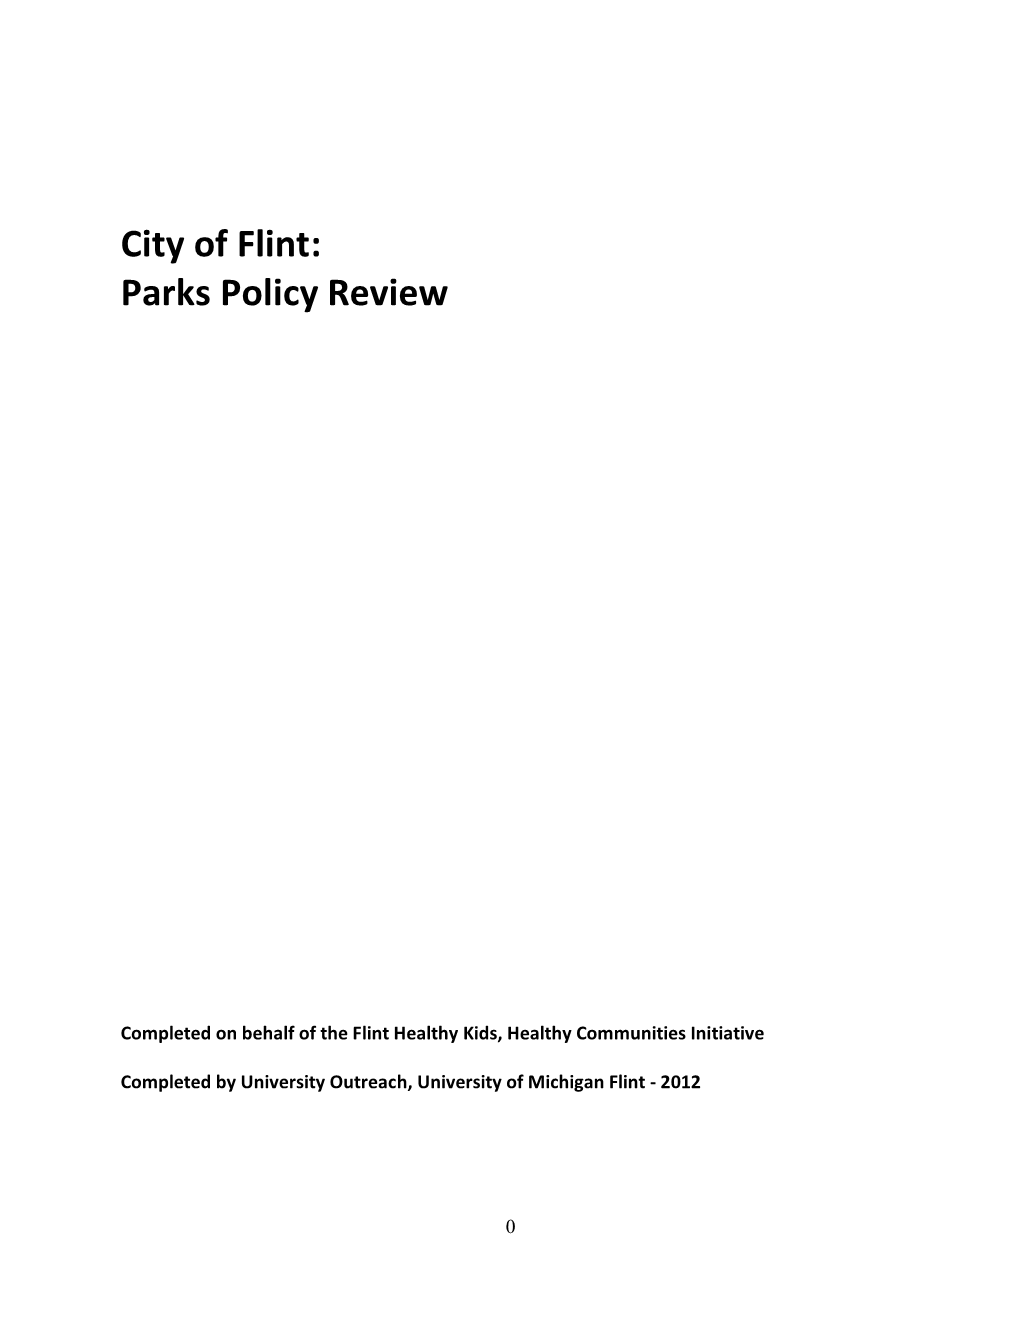 City of Flint: Parks Policy Review